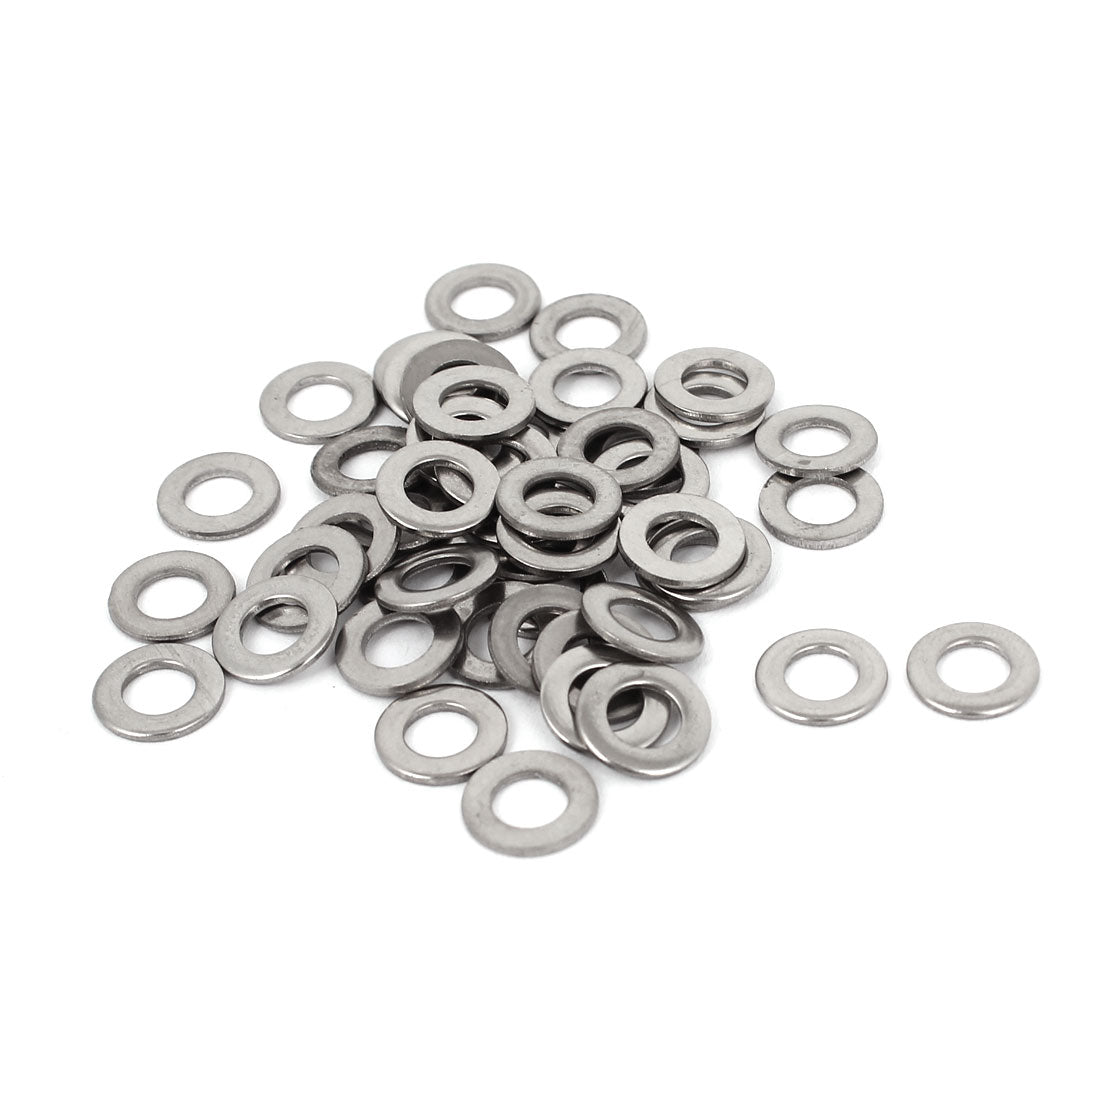 uxcell Uxcell 50pcs 304 Stainless Steel Flat Washer #10 Plain Spacer for Screws Bolts